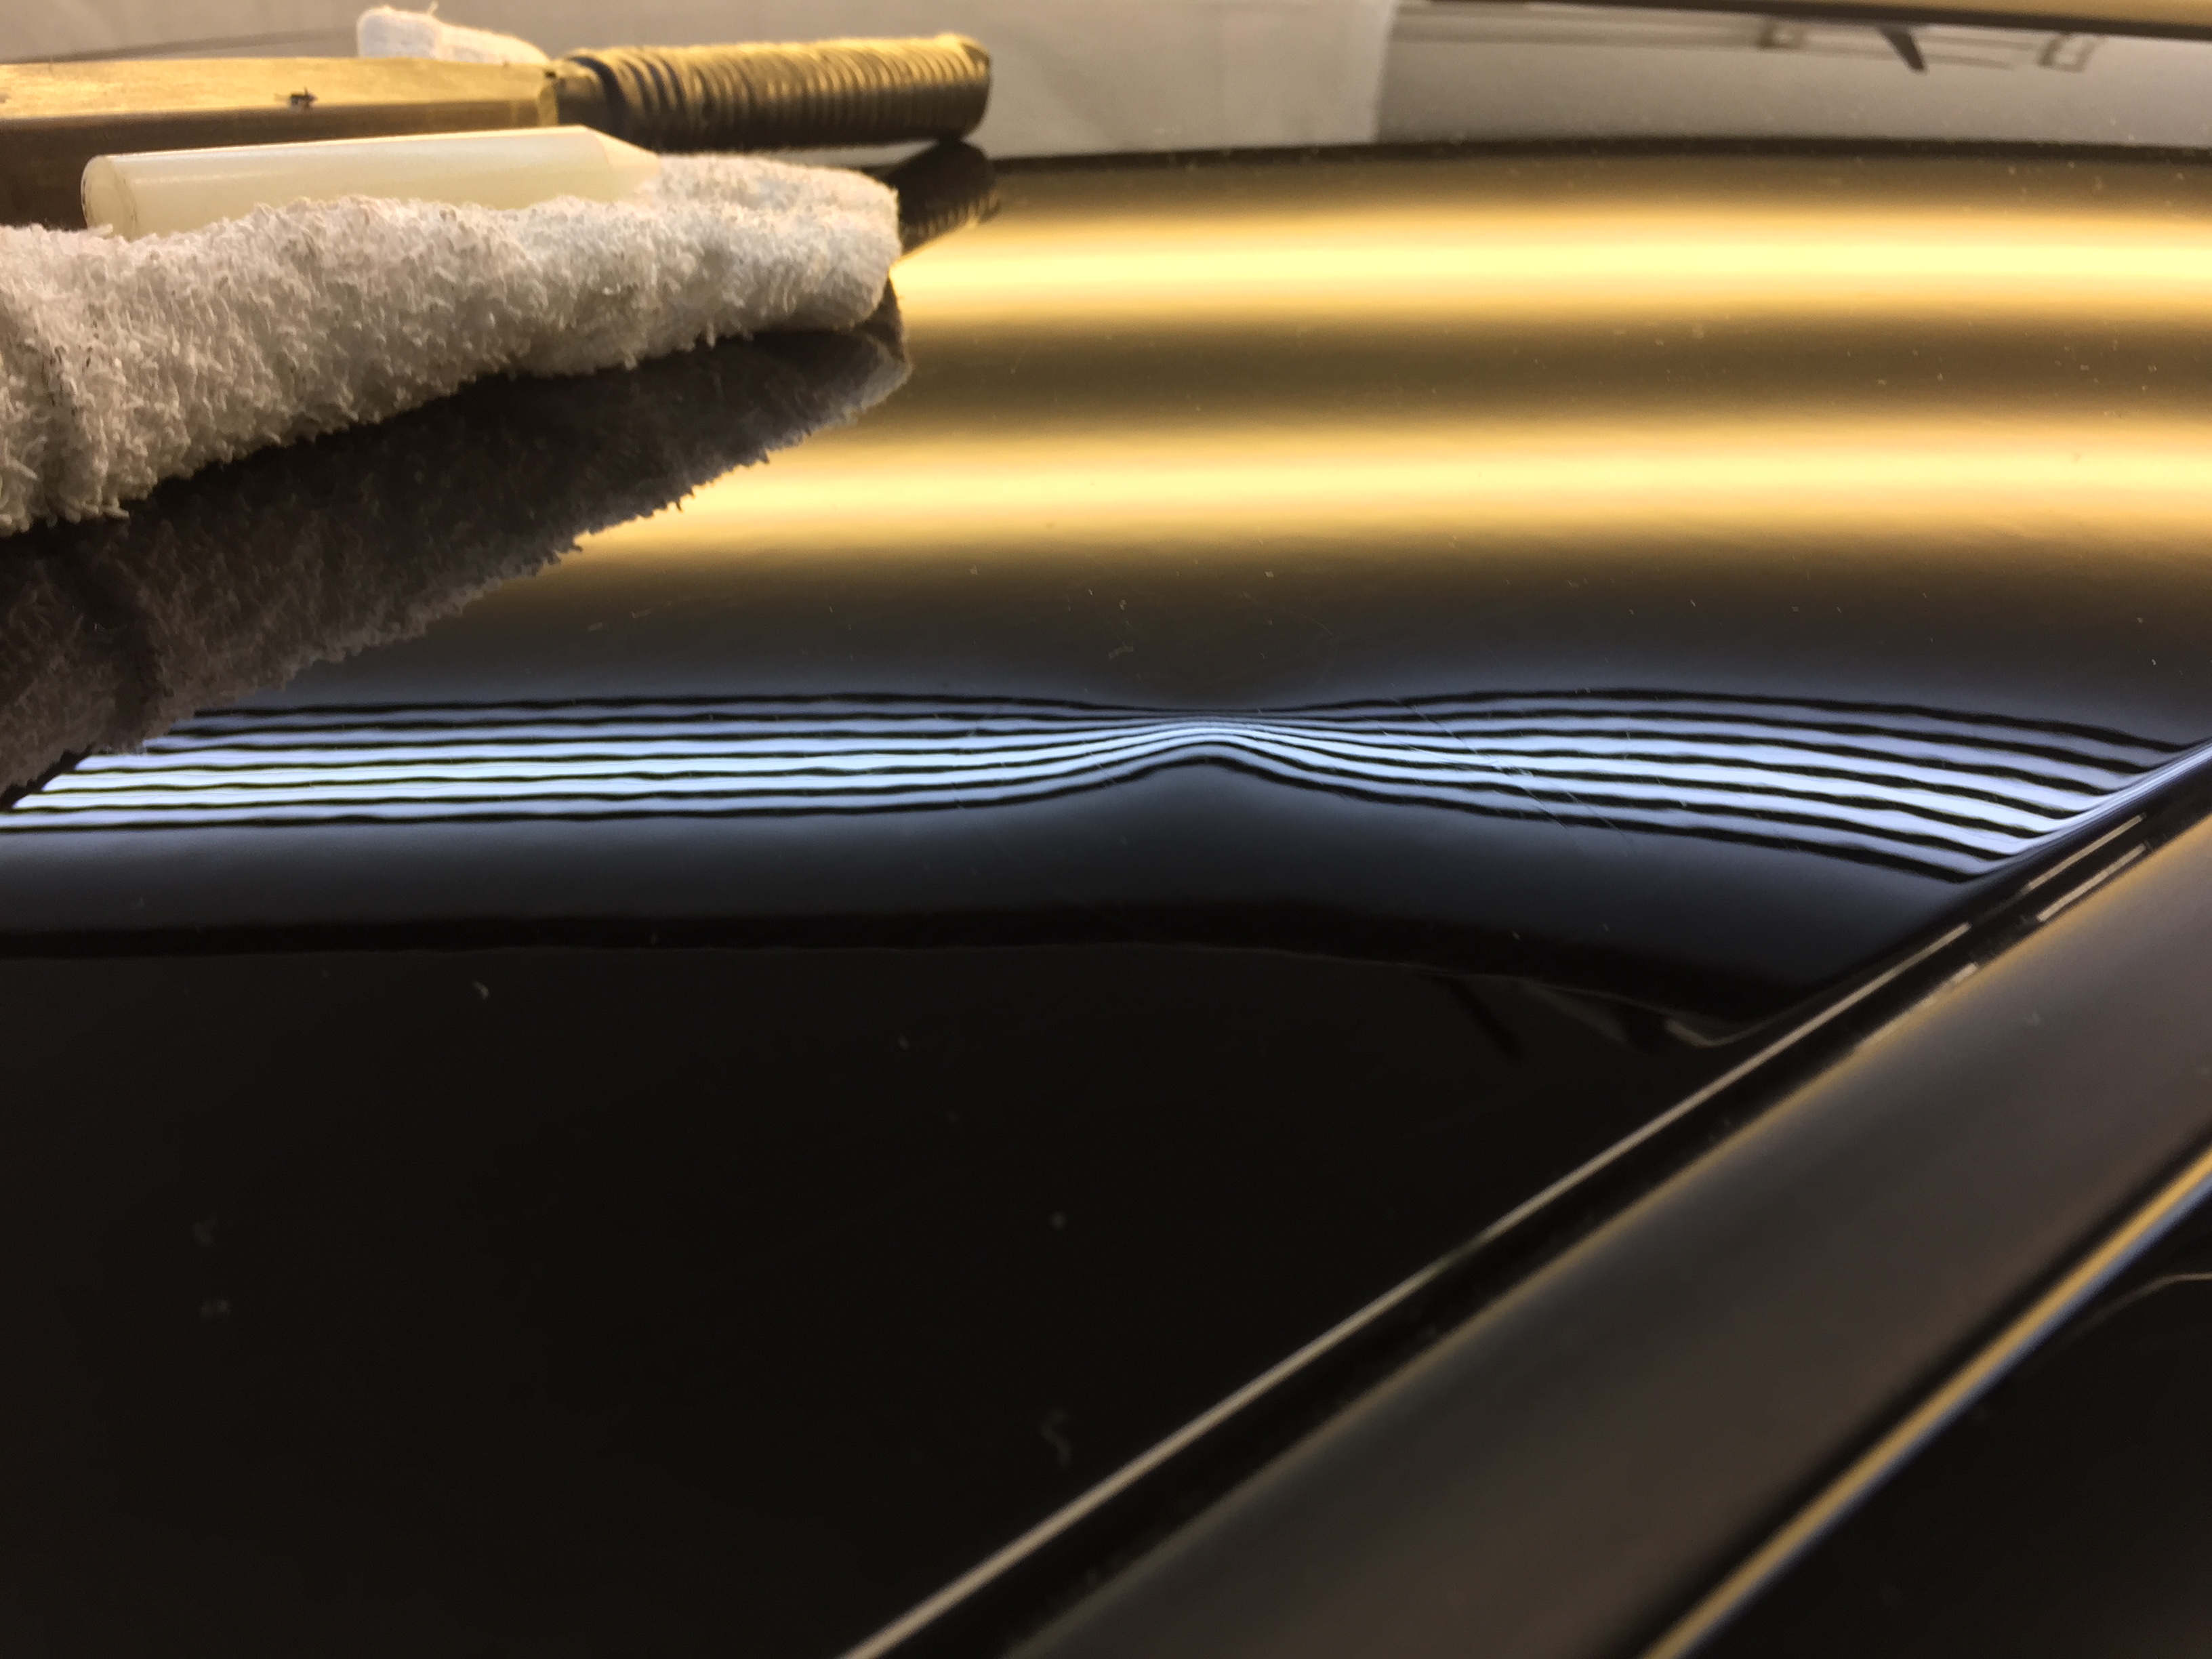 2015 Chevy Impala Large Dent Repair on Roof, Paintless Dent Repair Springfield, IL. Http://217dent.com